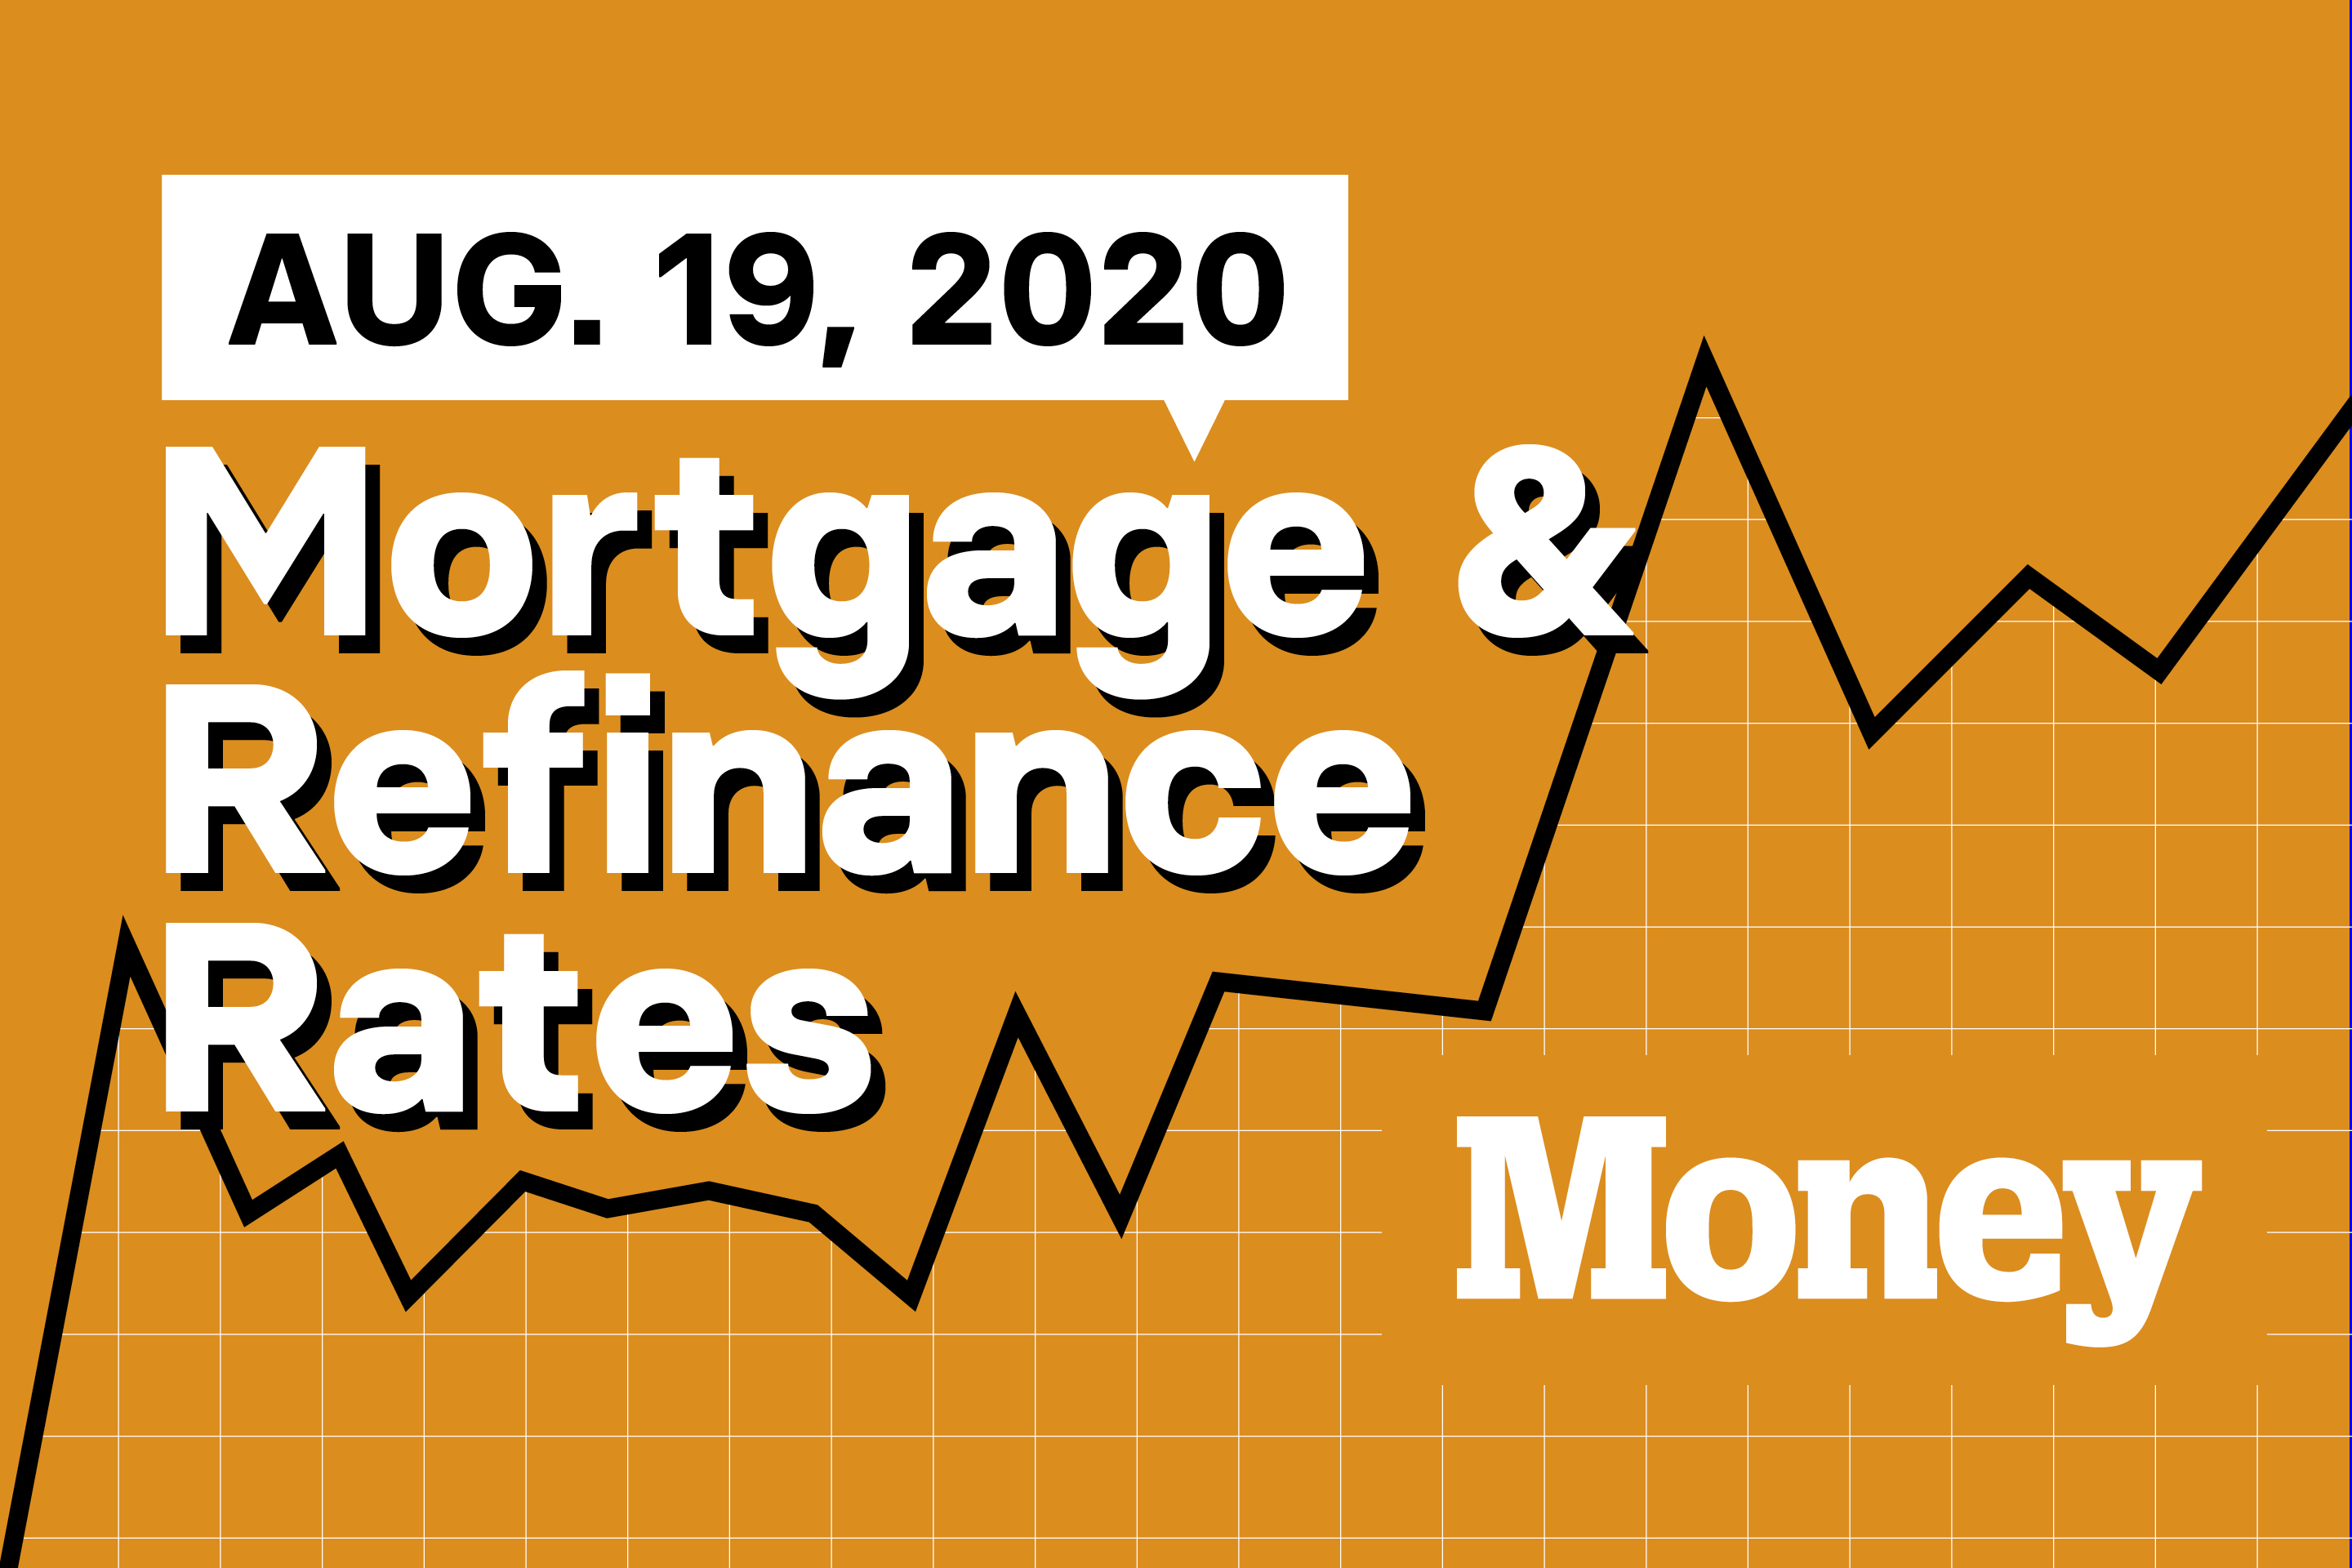 Here Are Today's Best Mortgage & Refinance Rates for August 19, 2020